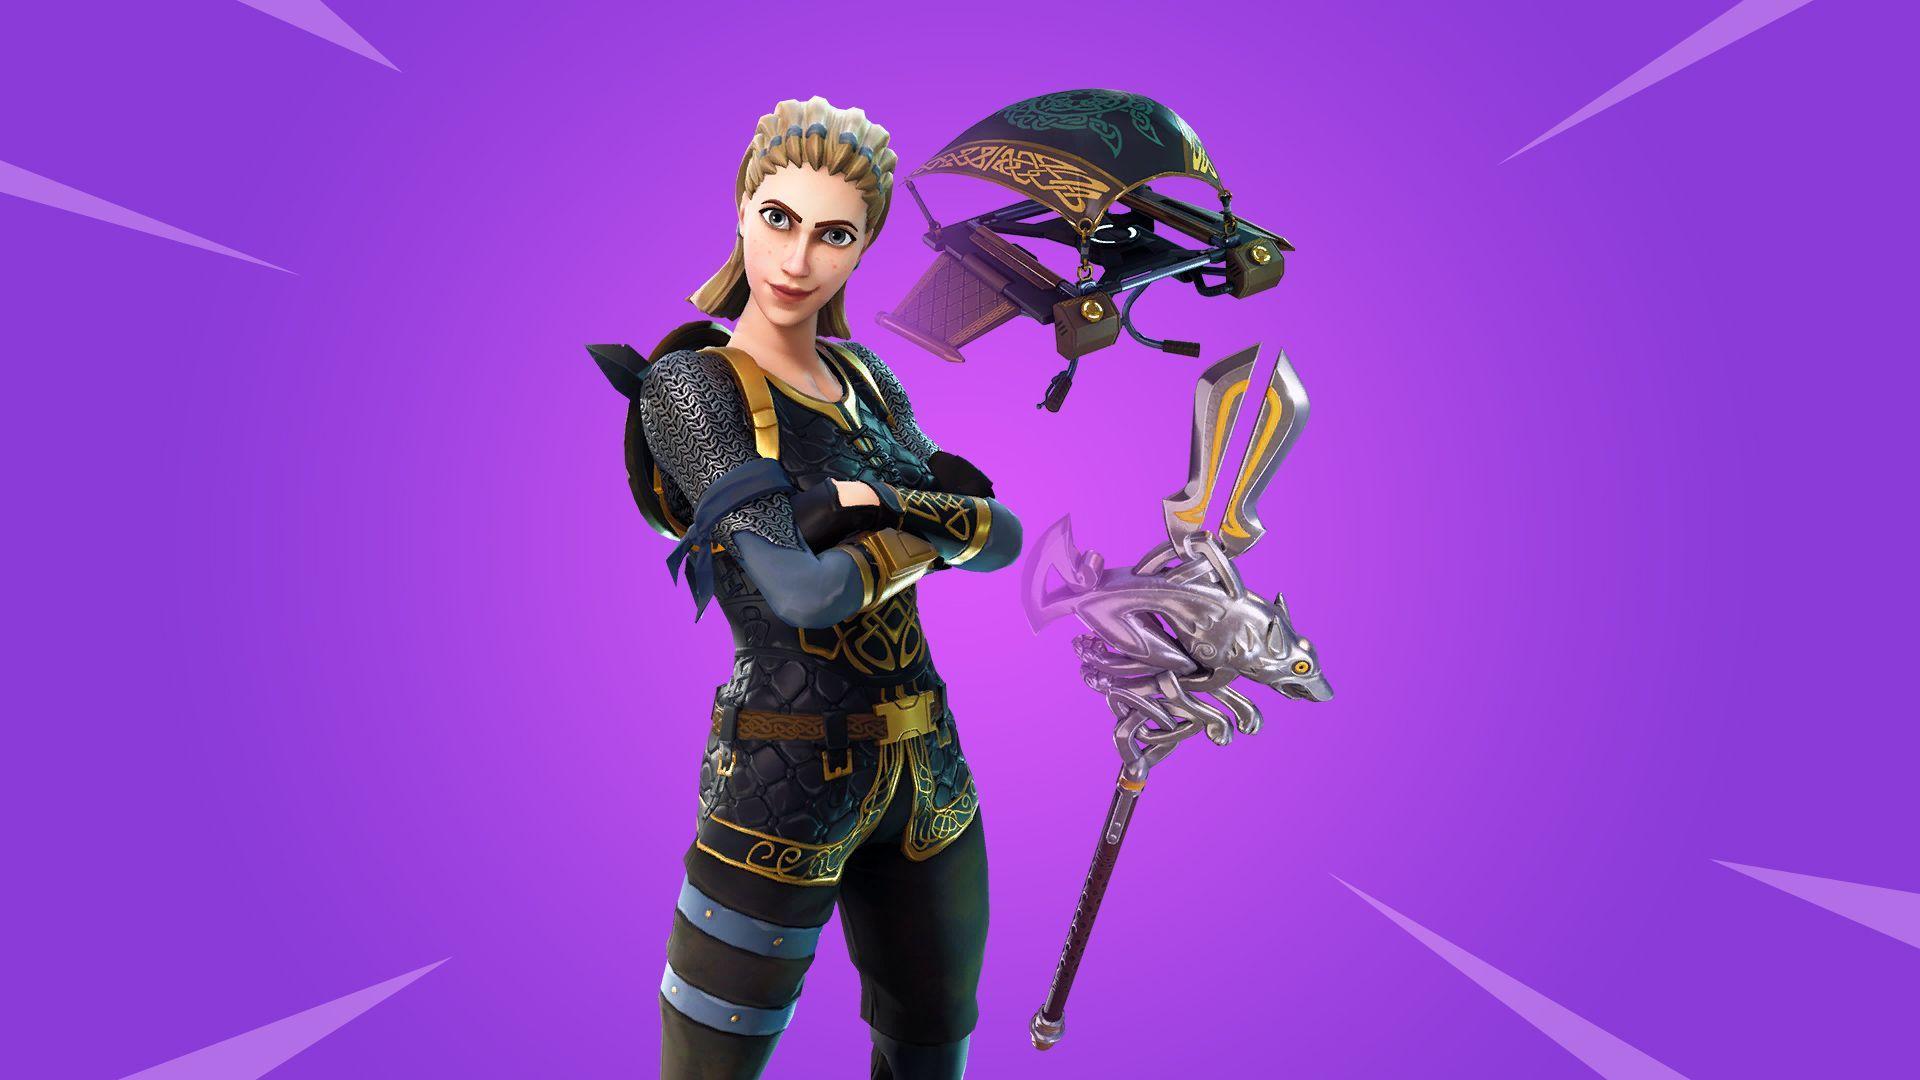 Updated Bundles have been temporarily removed from Fortnite's item